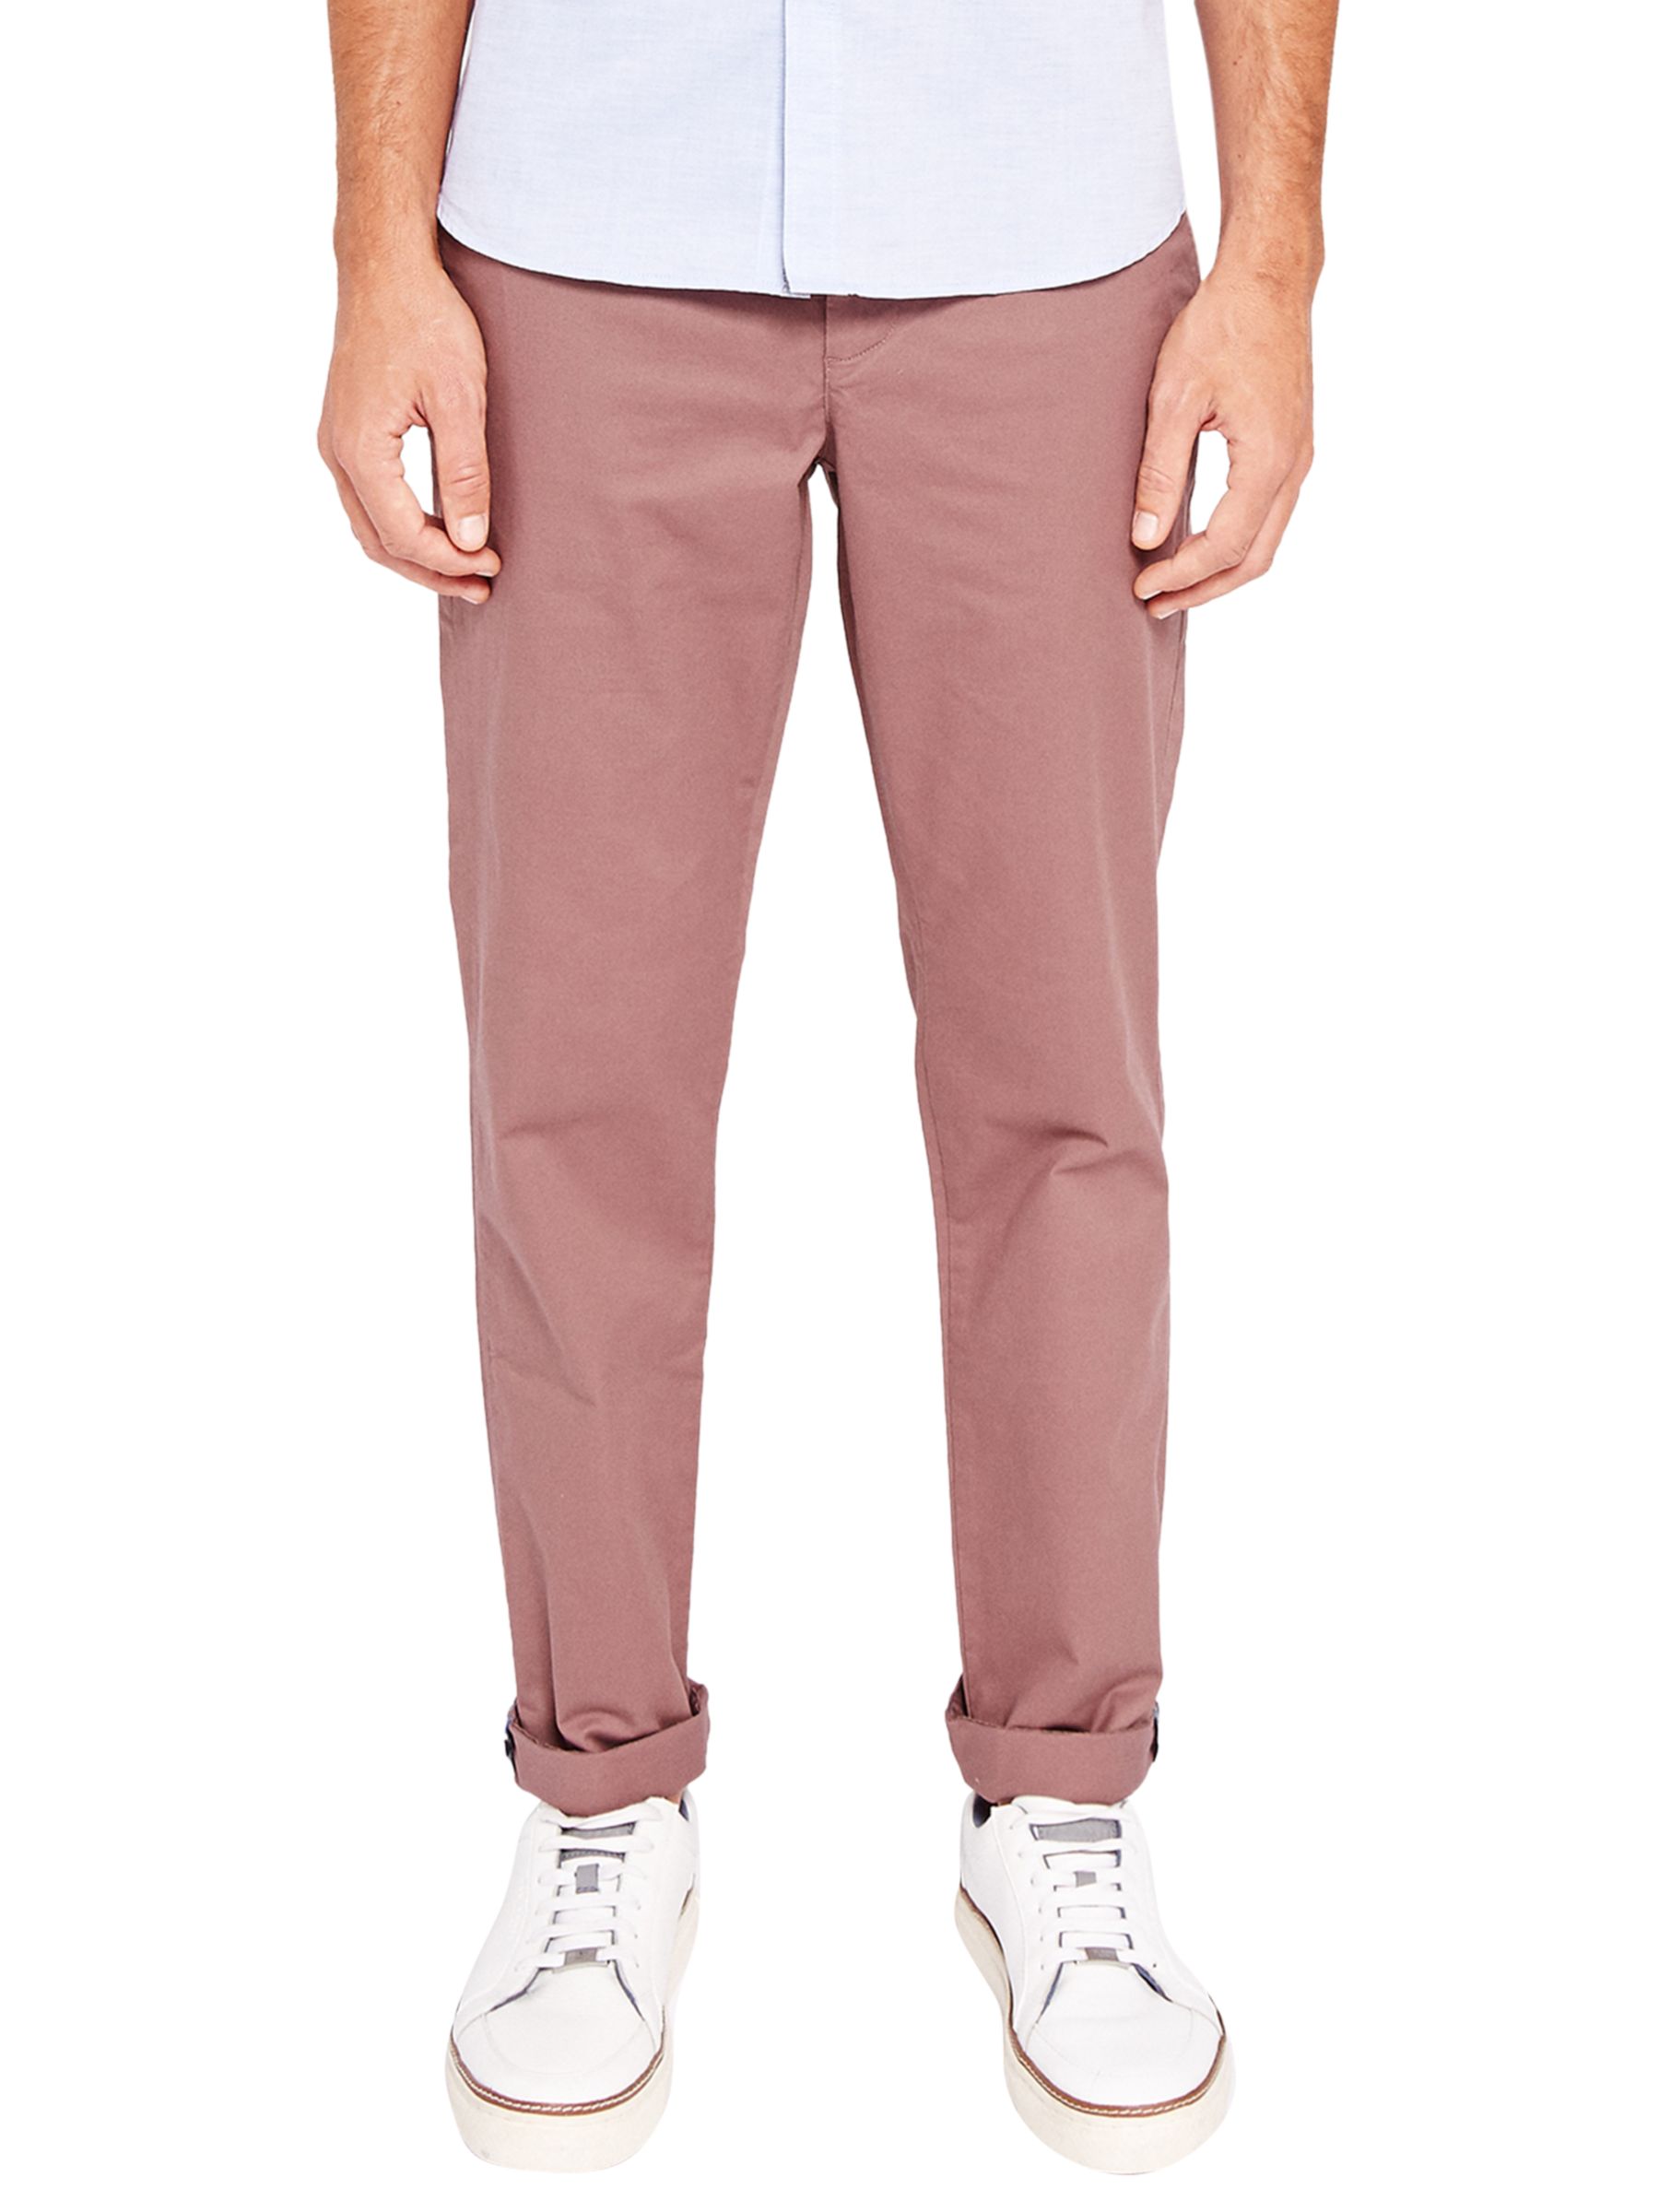 Ted Baker Clascor Chino Trousers, Pink, 34S